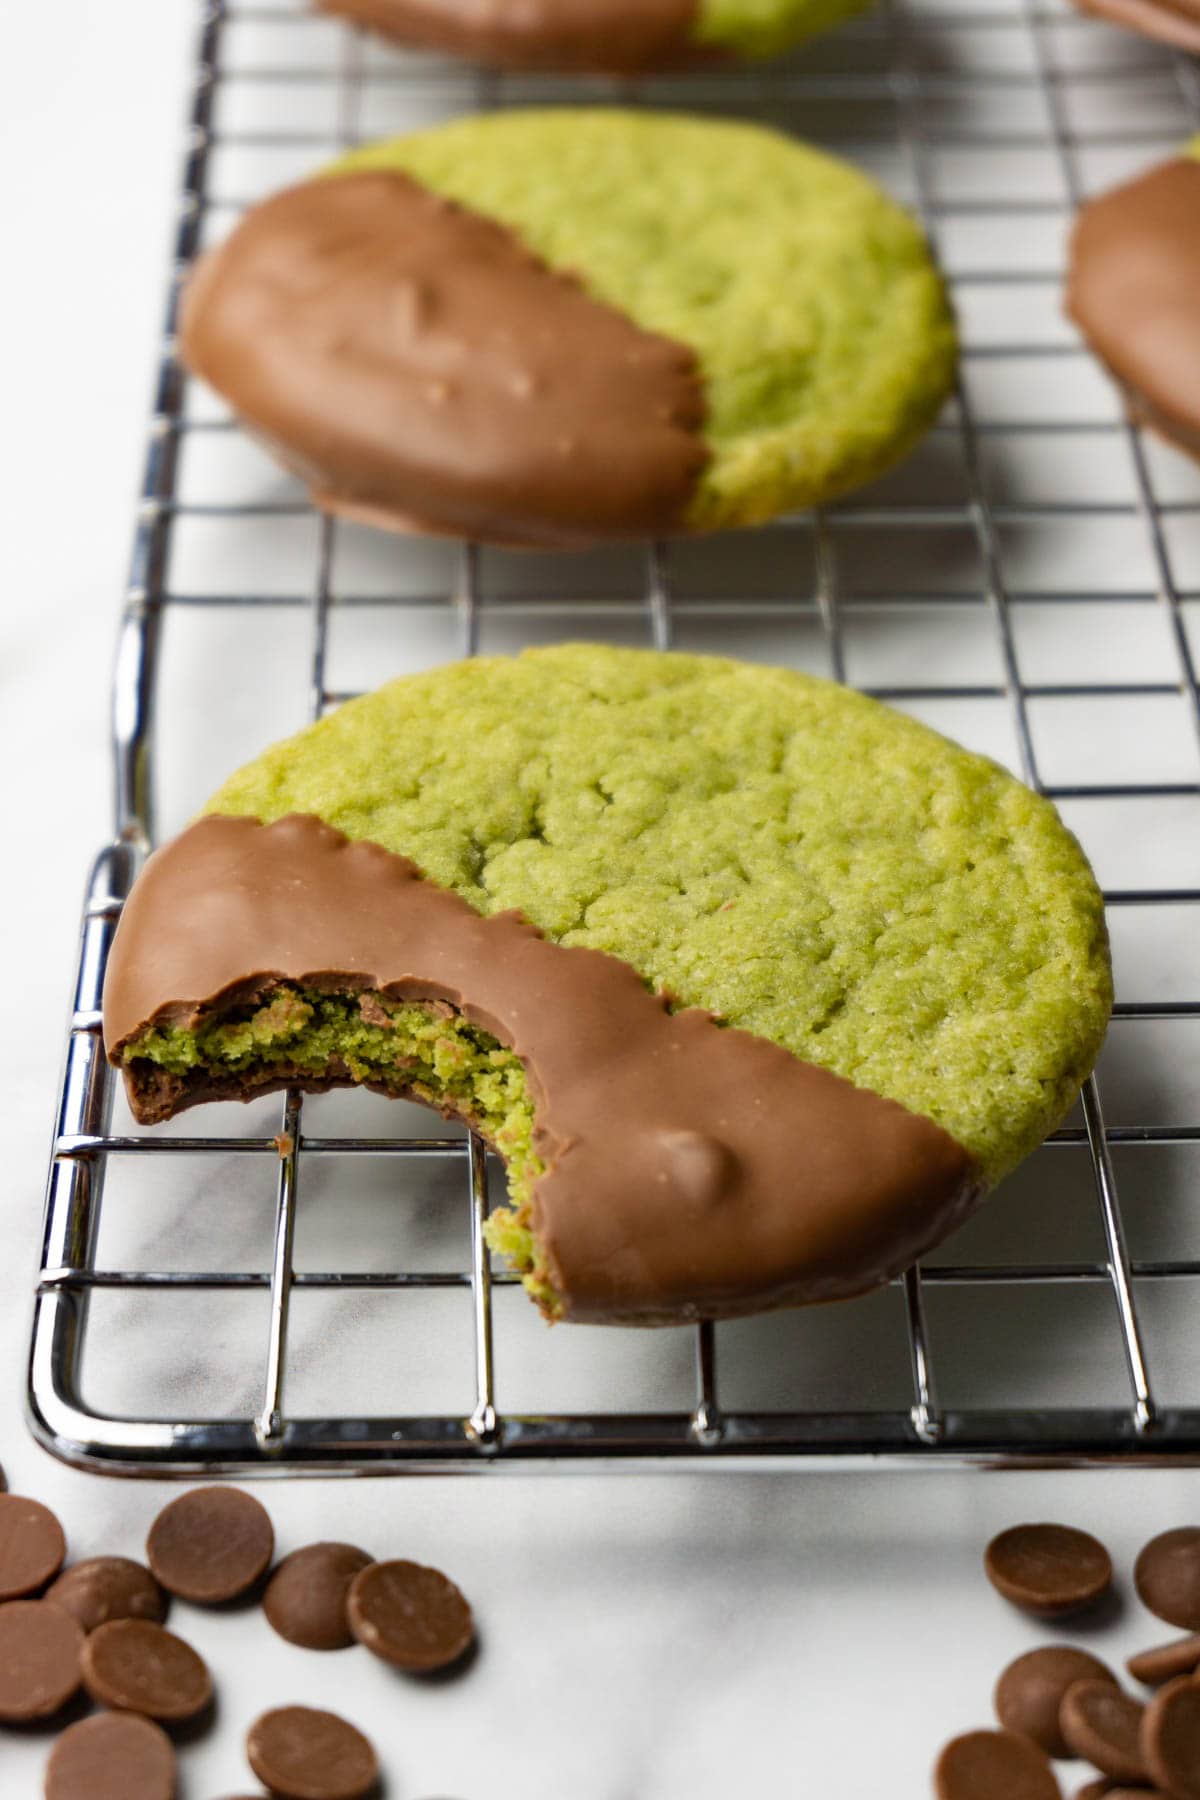 Matcha cookies with milk chocolate glaze on a cooling rack. One bite is taken from one of the cookies.